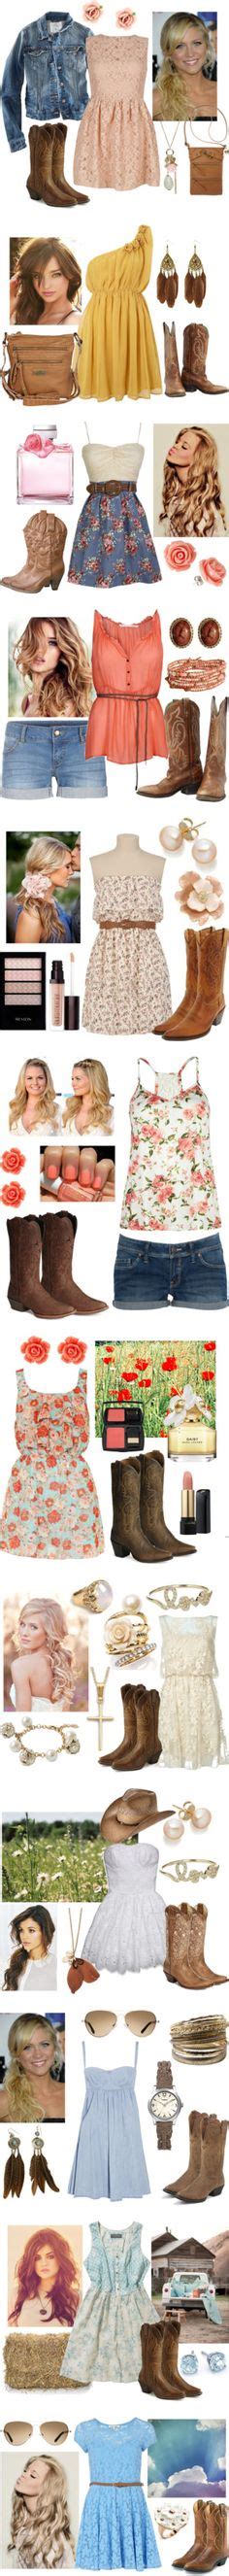 1000 images about summer outfits on pinterest summer outfits summer fashions and cute summer